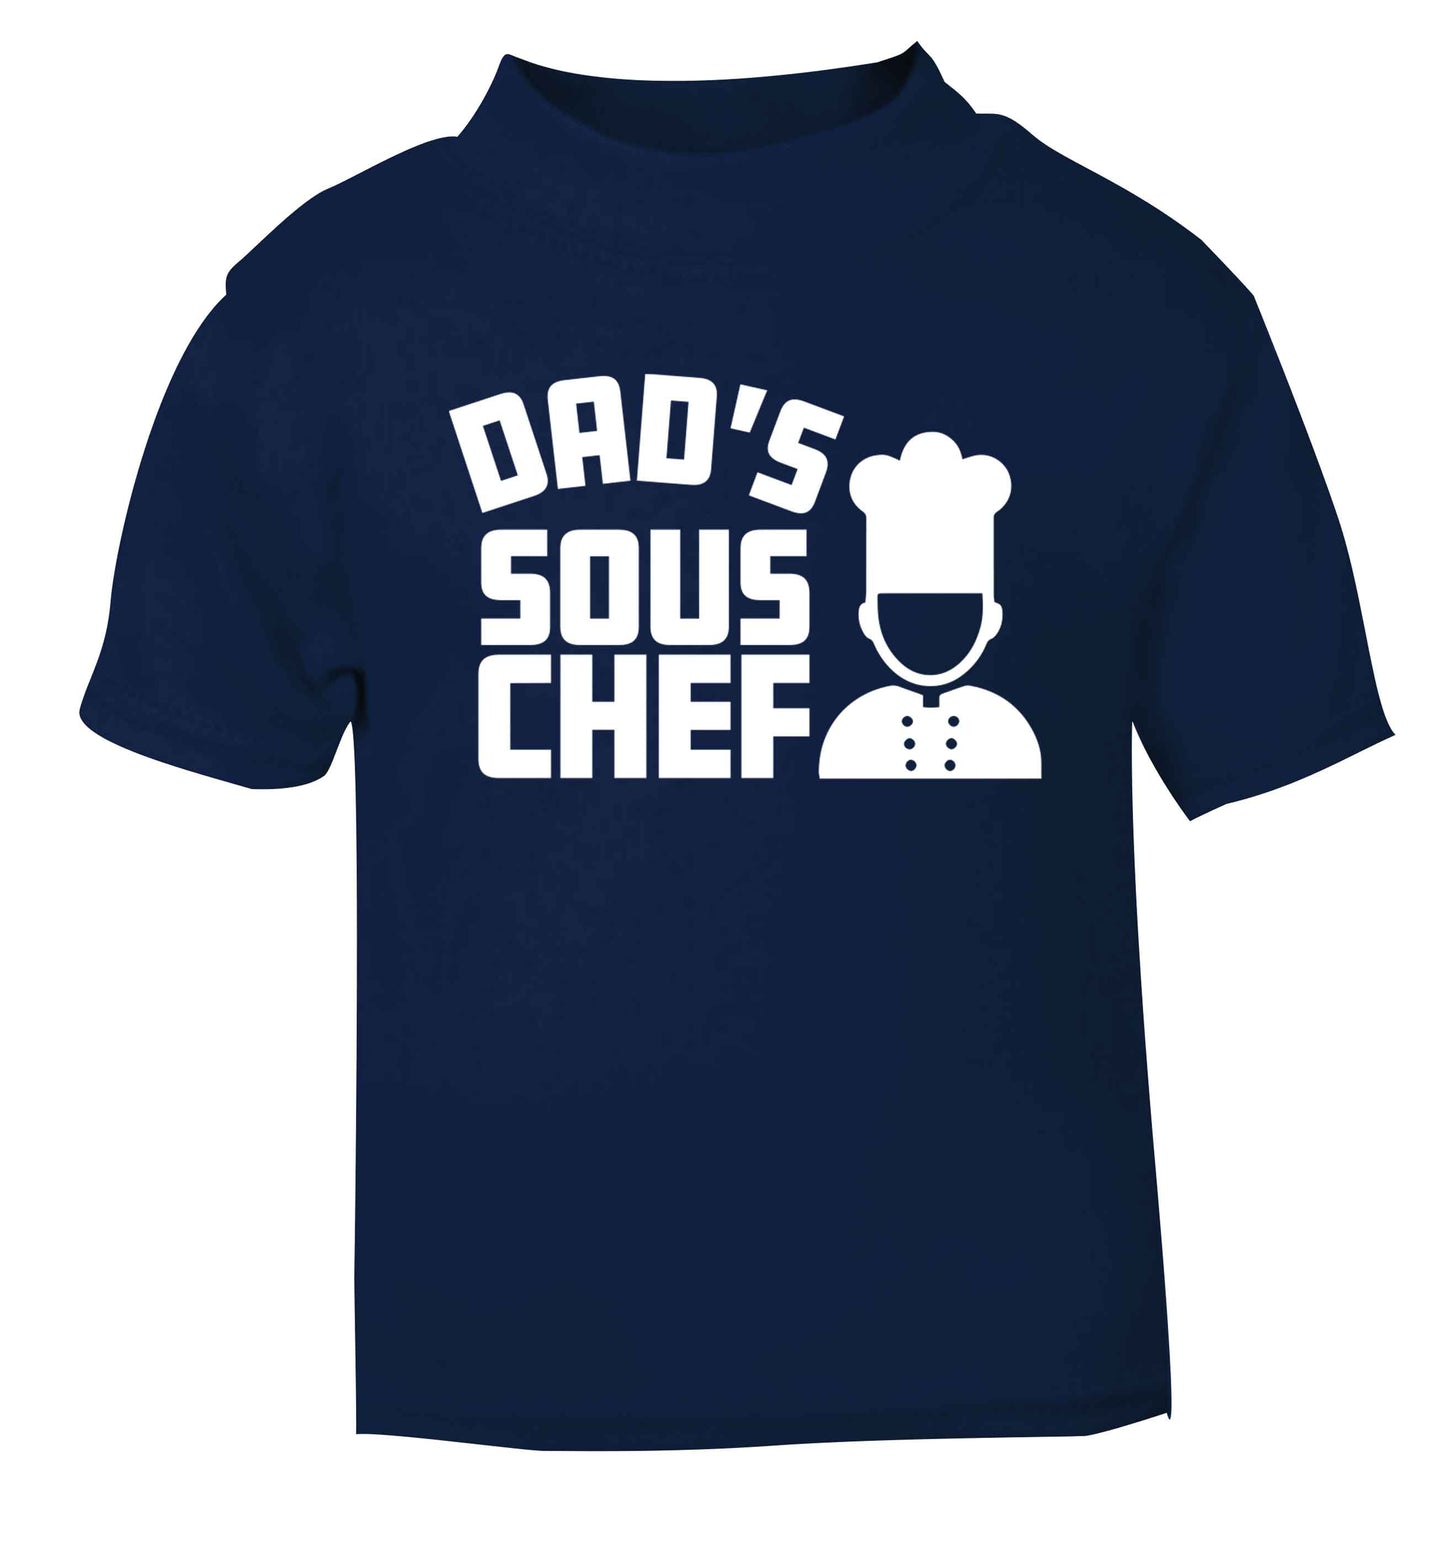 Dad's sous chef navy baby toddler Tshirt 2 Years